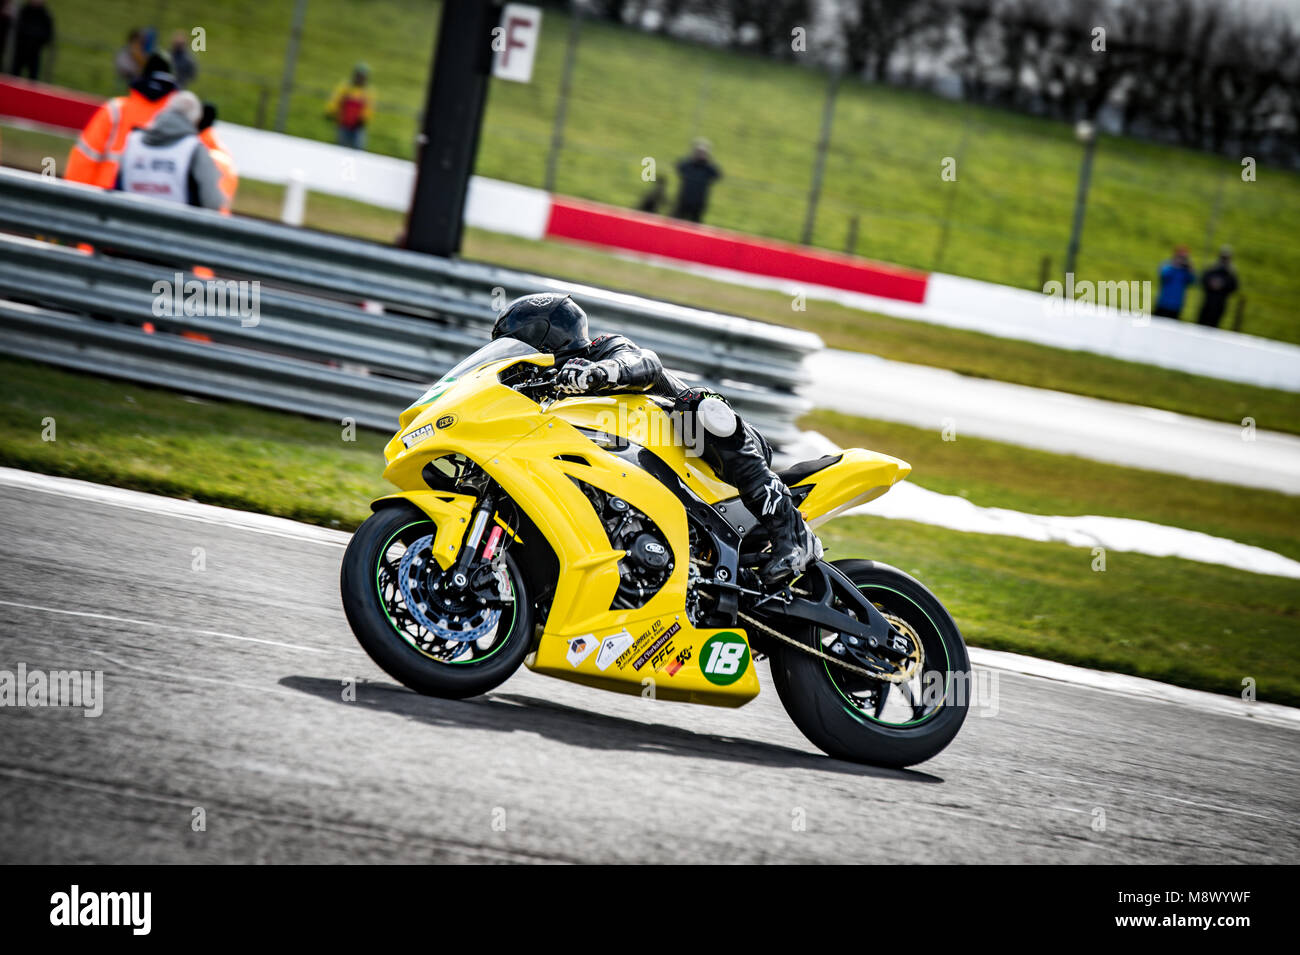 Donington Park, UK. 20th Mar, 2018. BSB testing today at Donington Park, despite the cold weather the riders managed to get out on track for testing prior to the first meeting here on 31st March Credit: Best/Alamy Live News Stock Photo